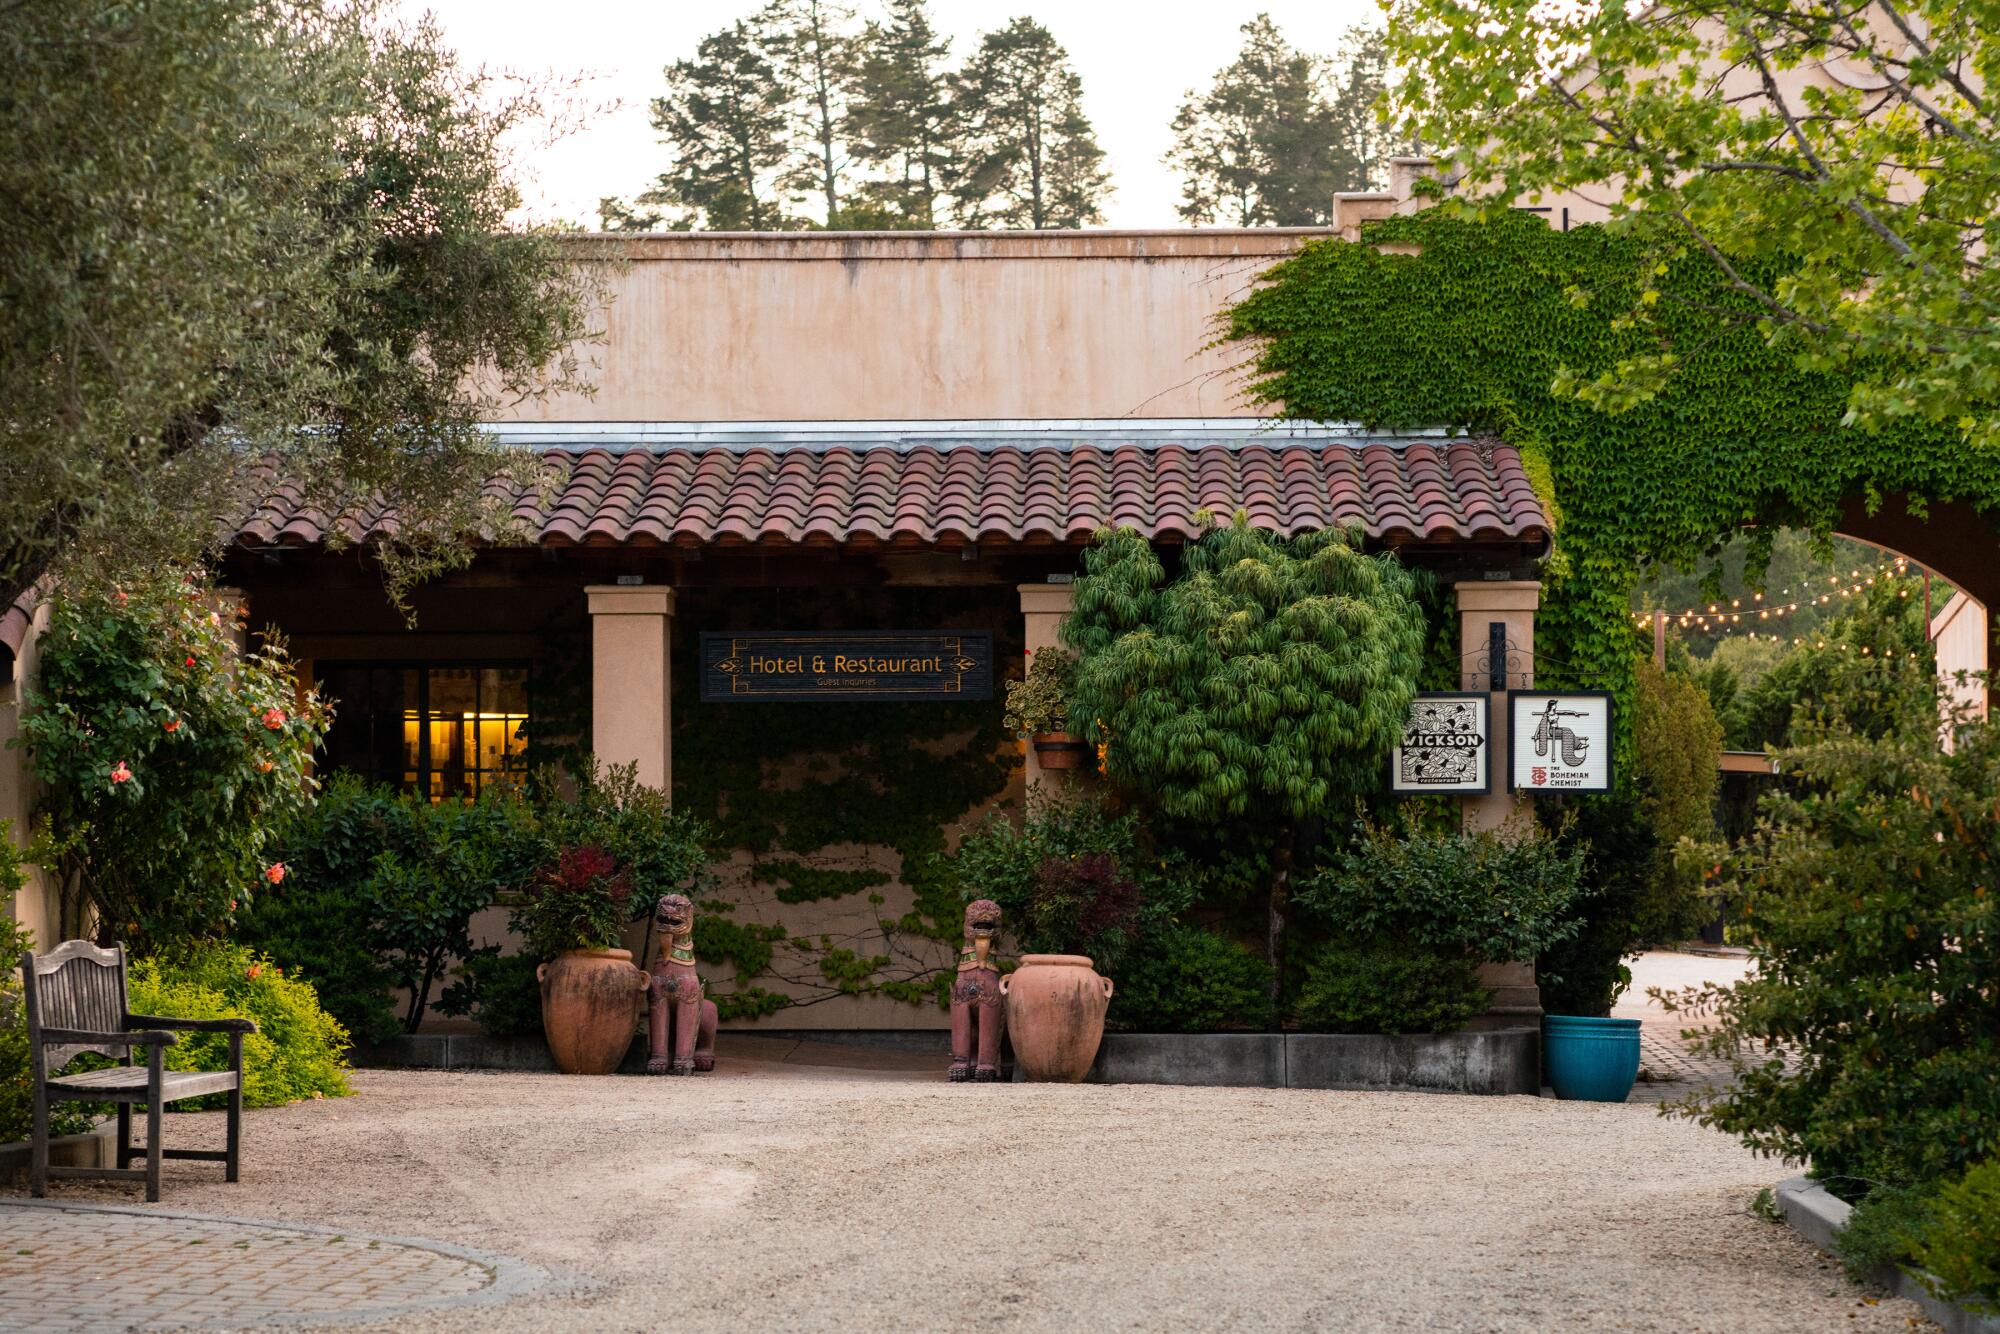 The exterior of a boutique hotel with a stucco tile roof, surrounded by lush greenery.